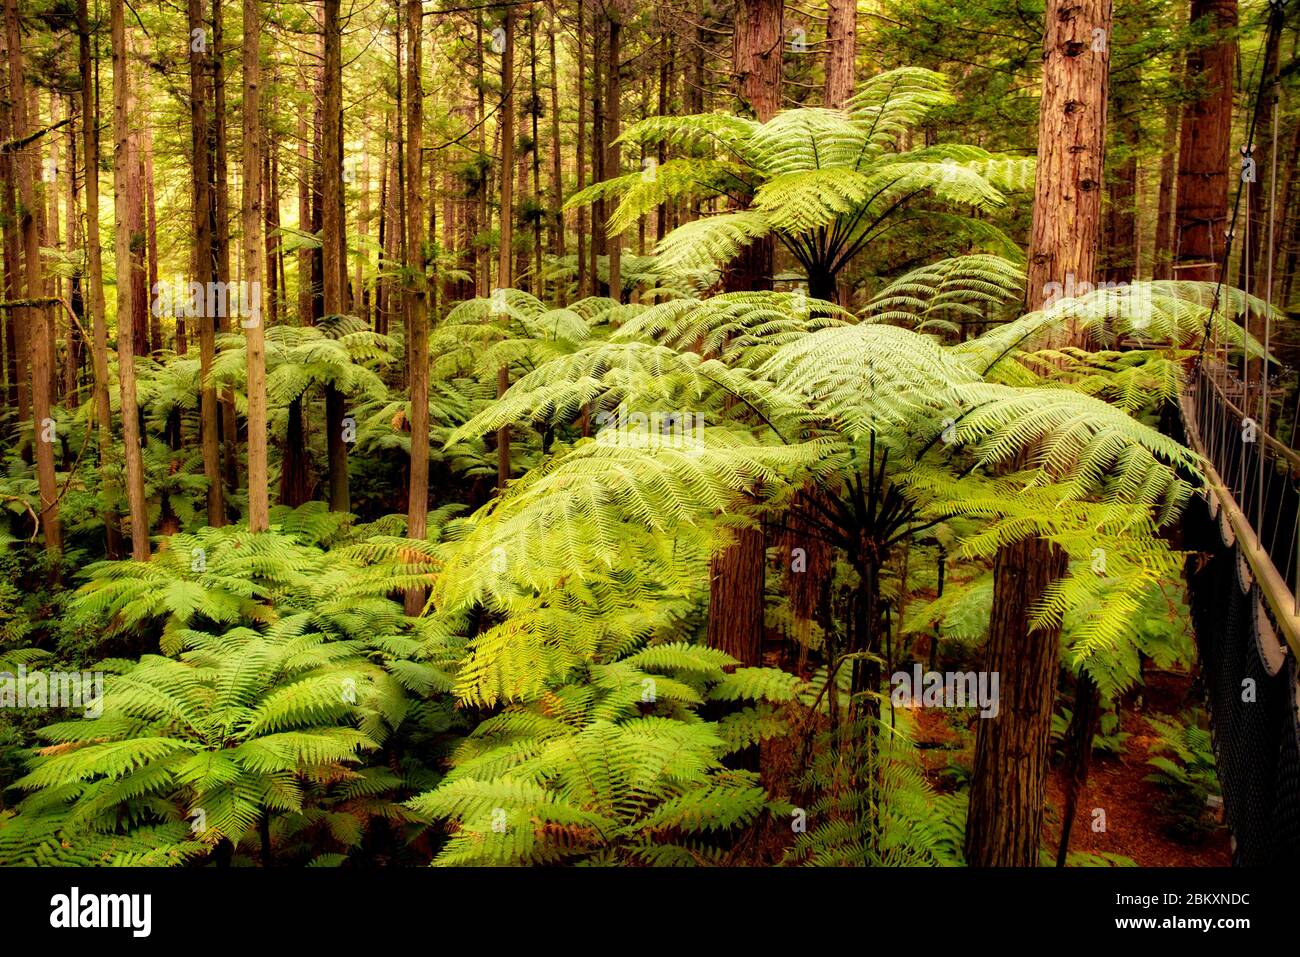 New Zealand native ferns and punga trees growing amidst the giant Californian redwoods in the forest at Whakarewarewa Rotoruua Stock Photo